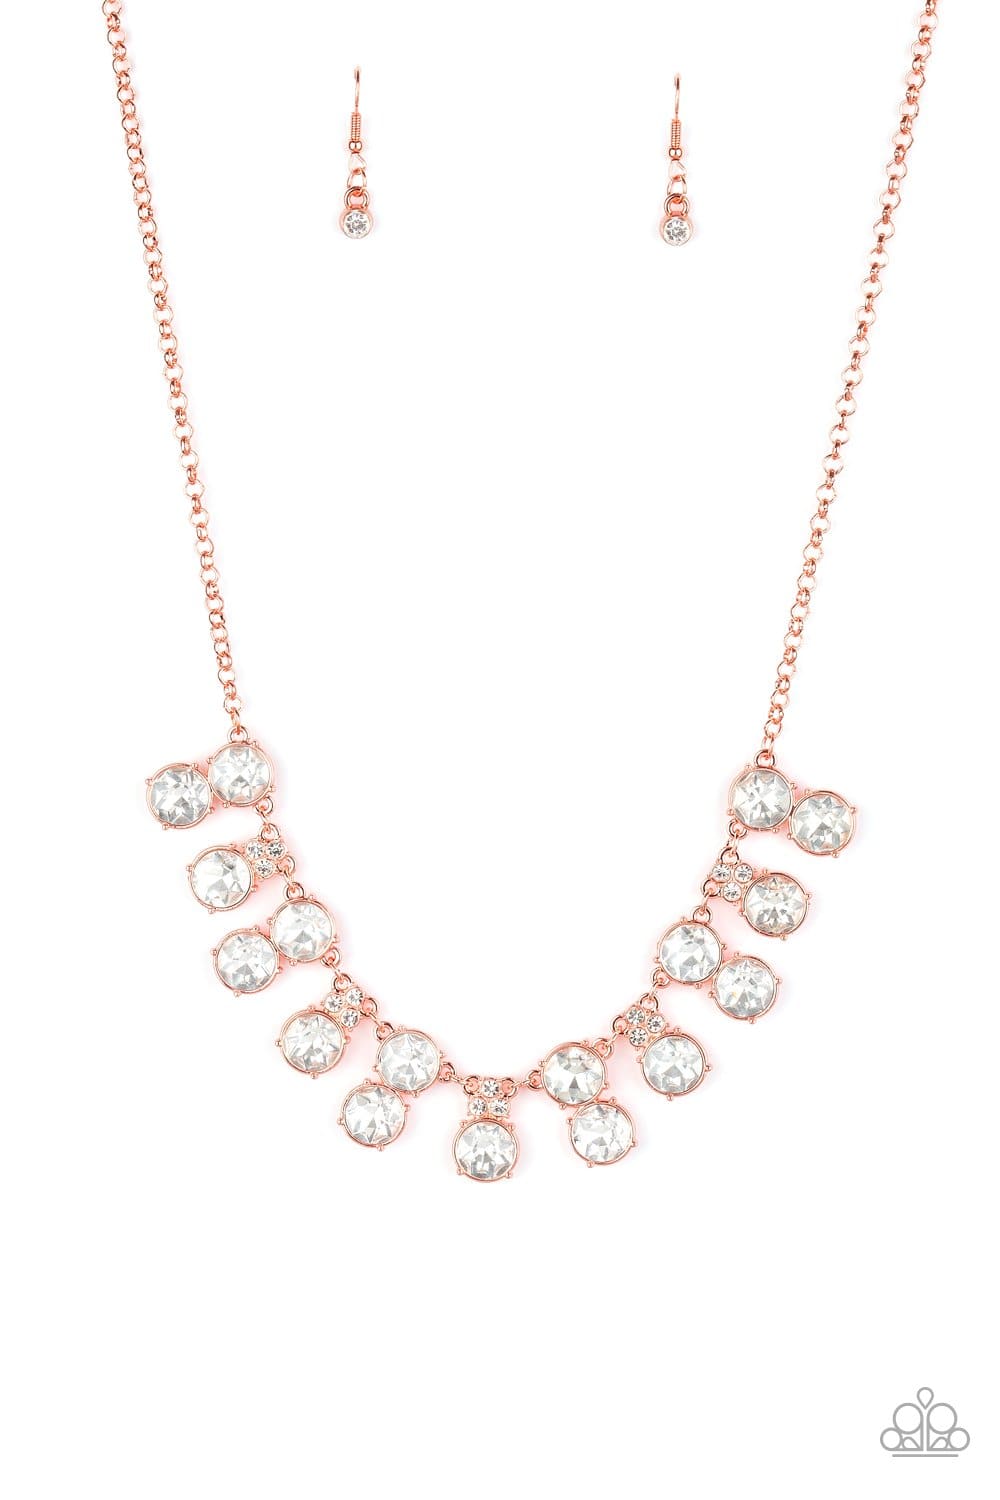 A337 - Top Dollar Twinkle - Copper by Paparazzi Accessories on Fancy5Fashion.com